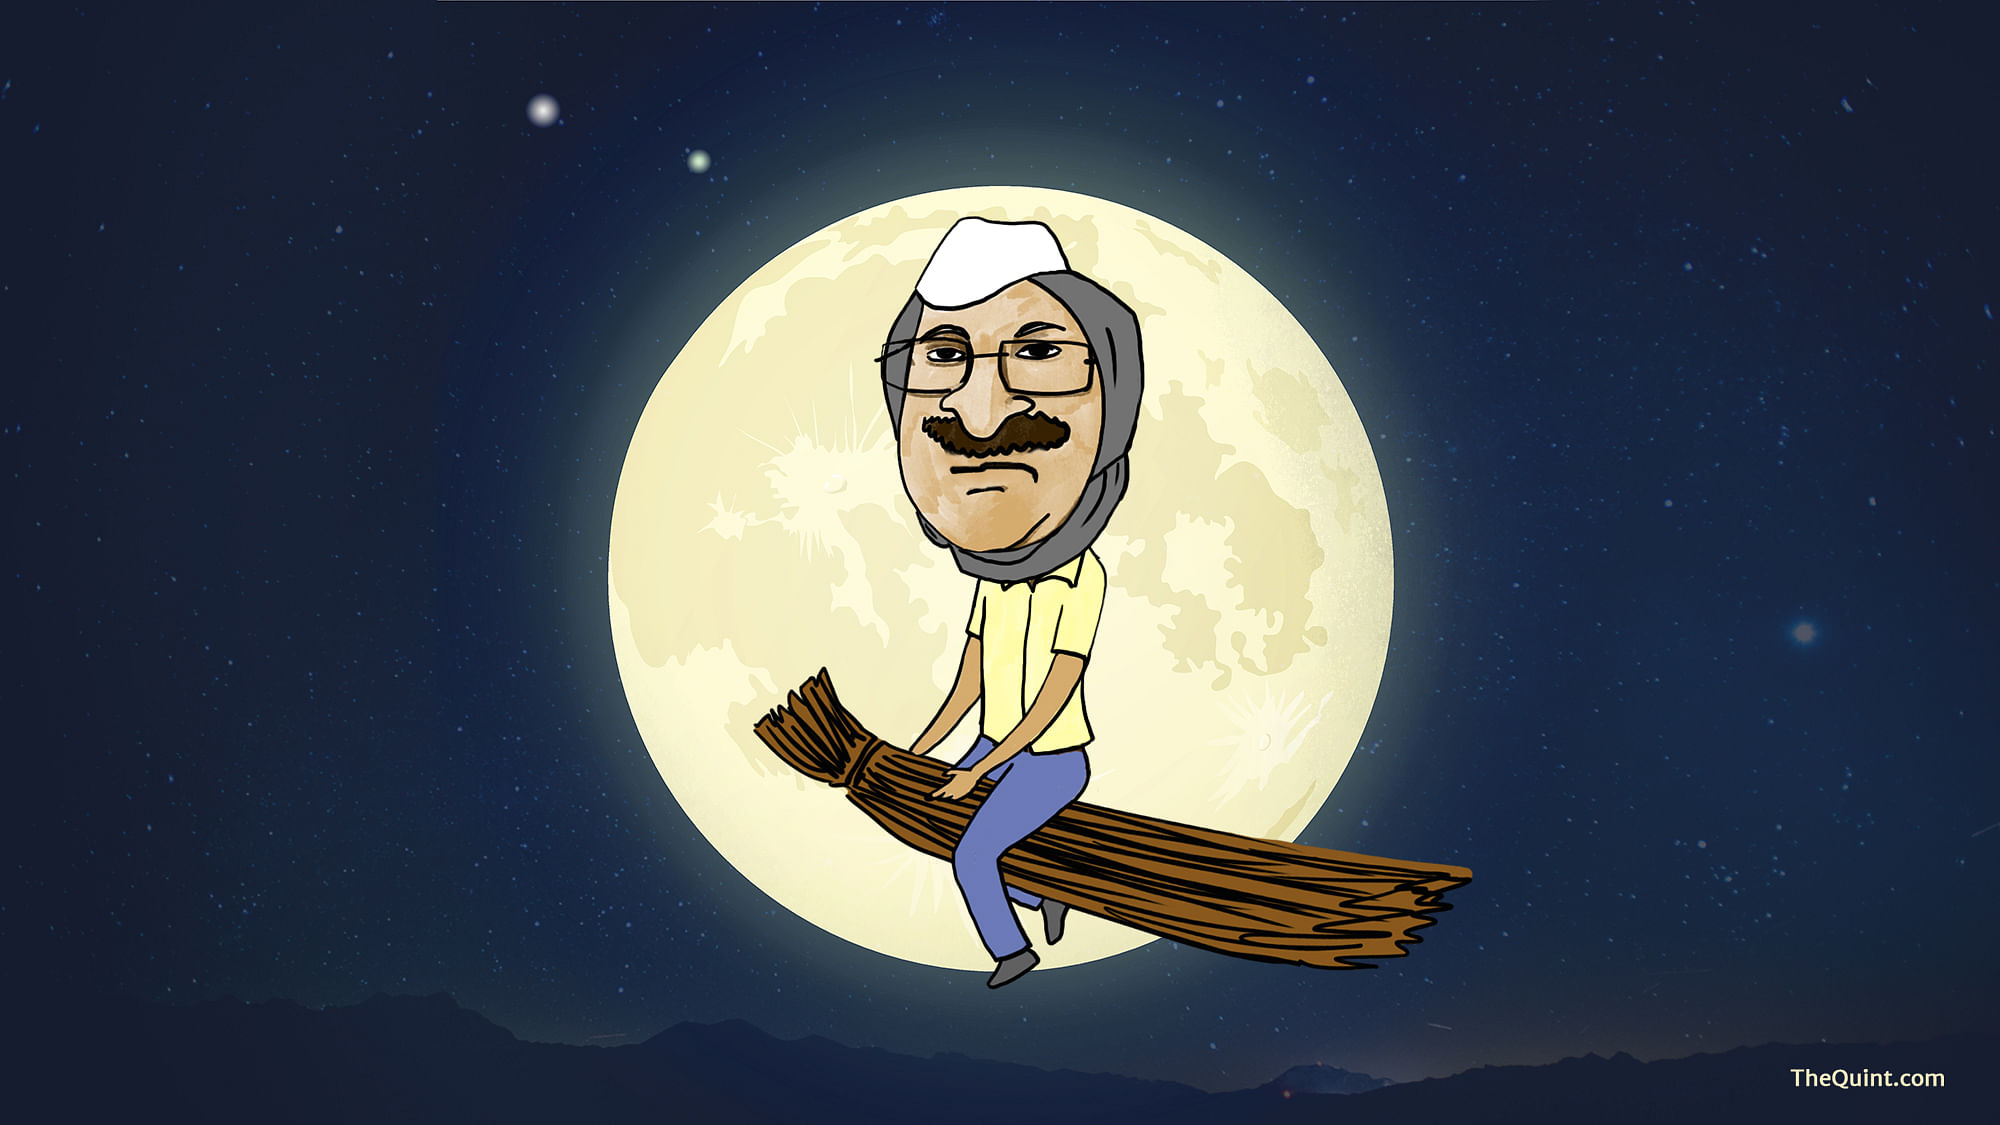 Artistic impression of AAP chief Arvind Kejriwal used for representational purposes.